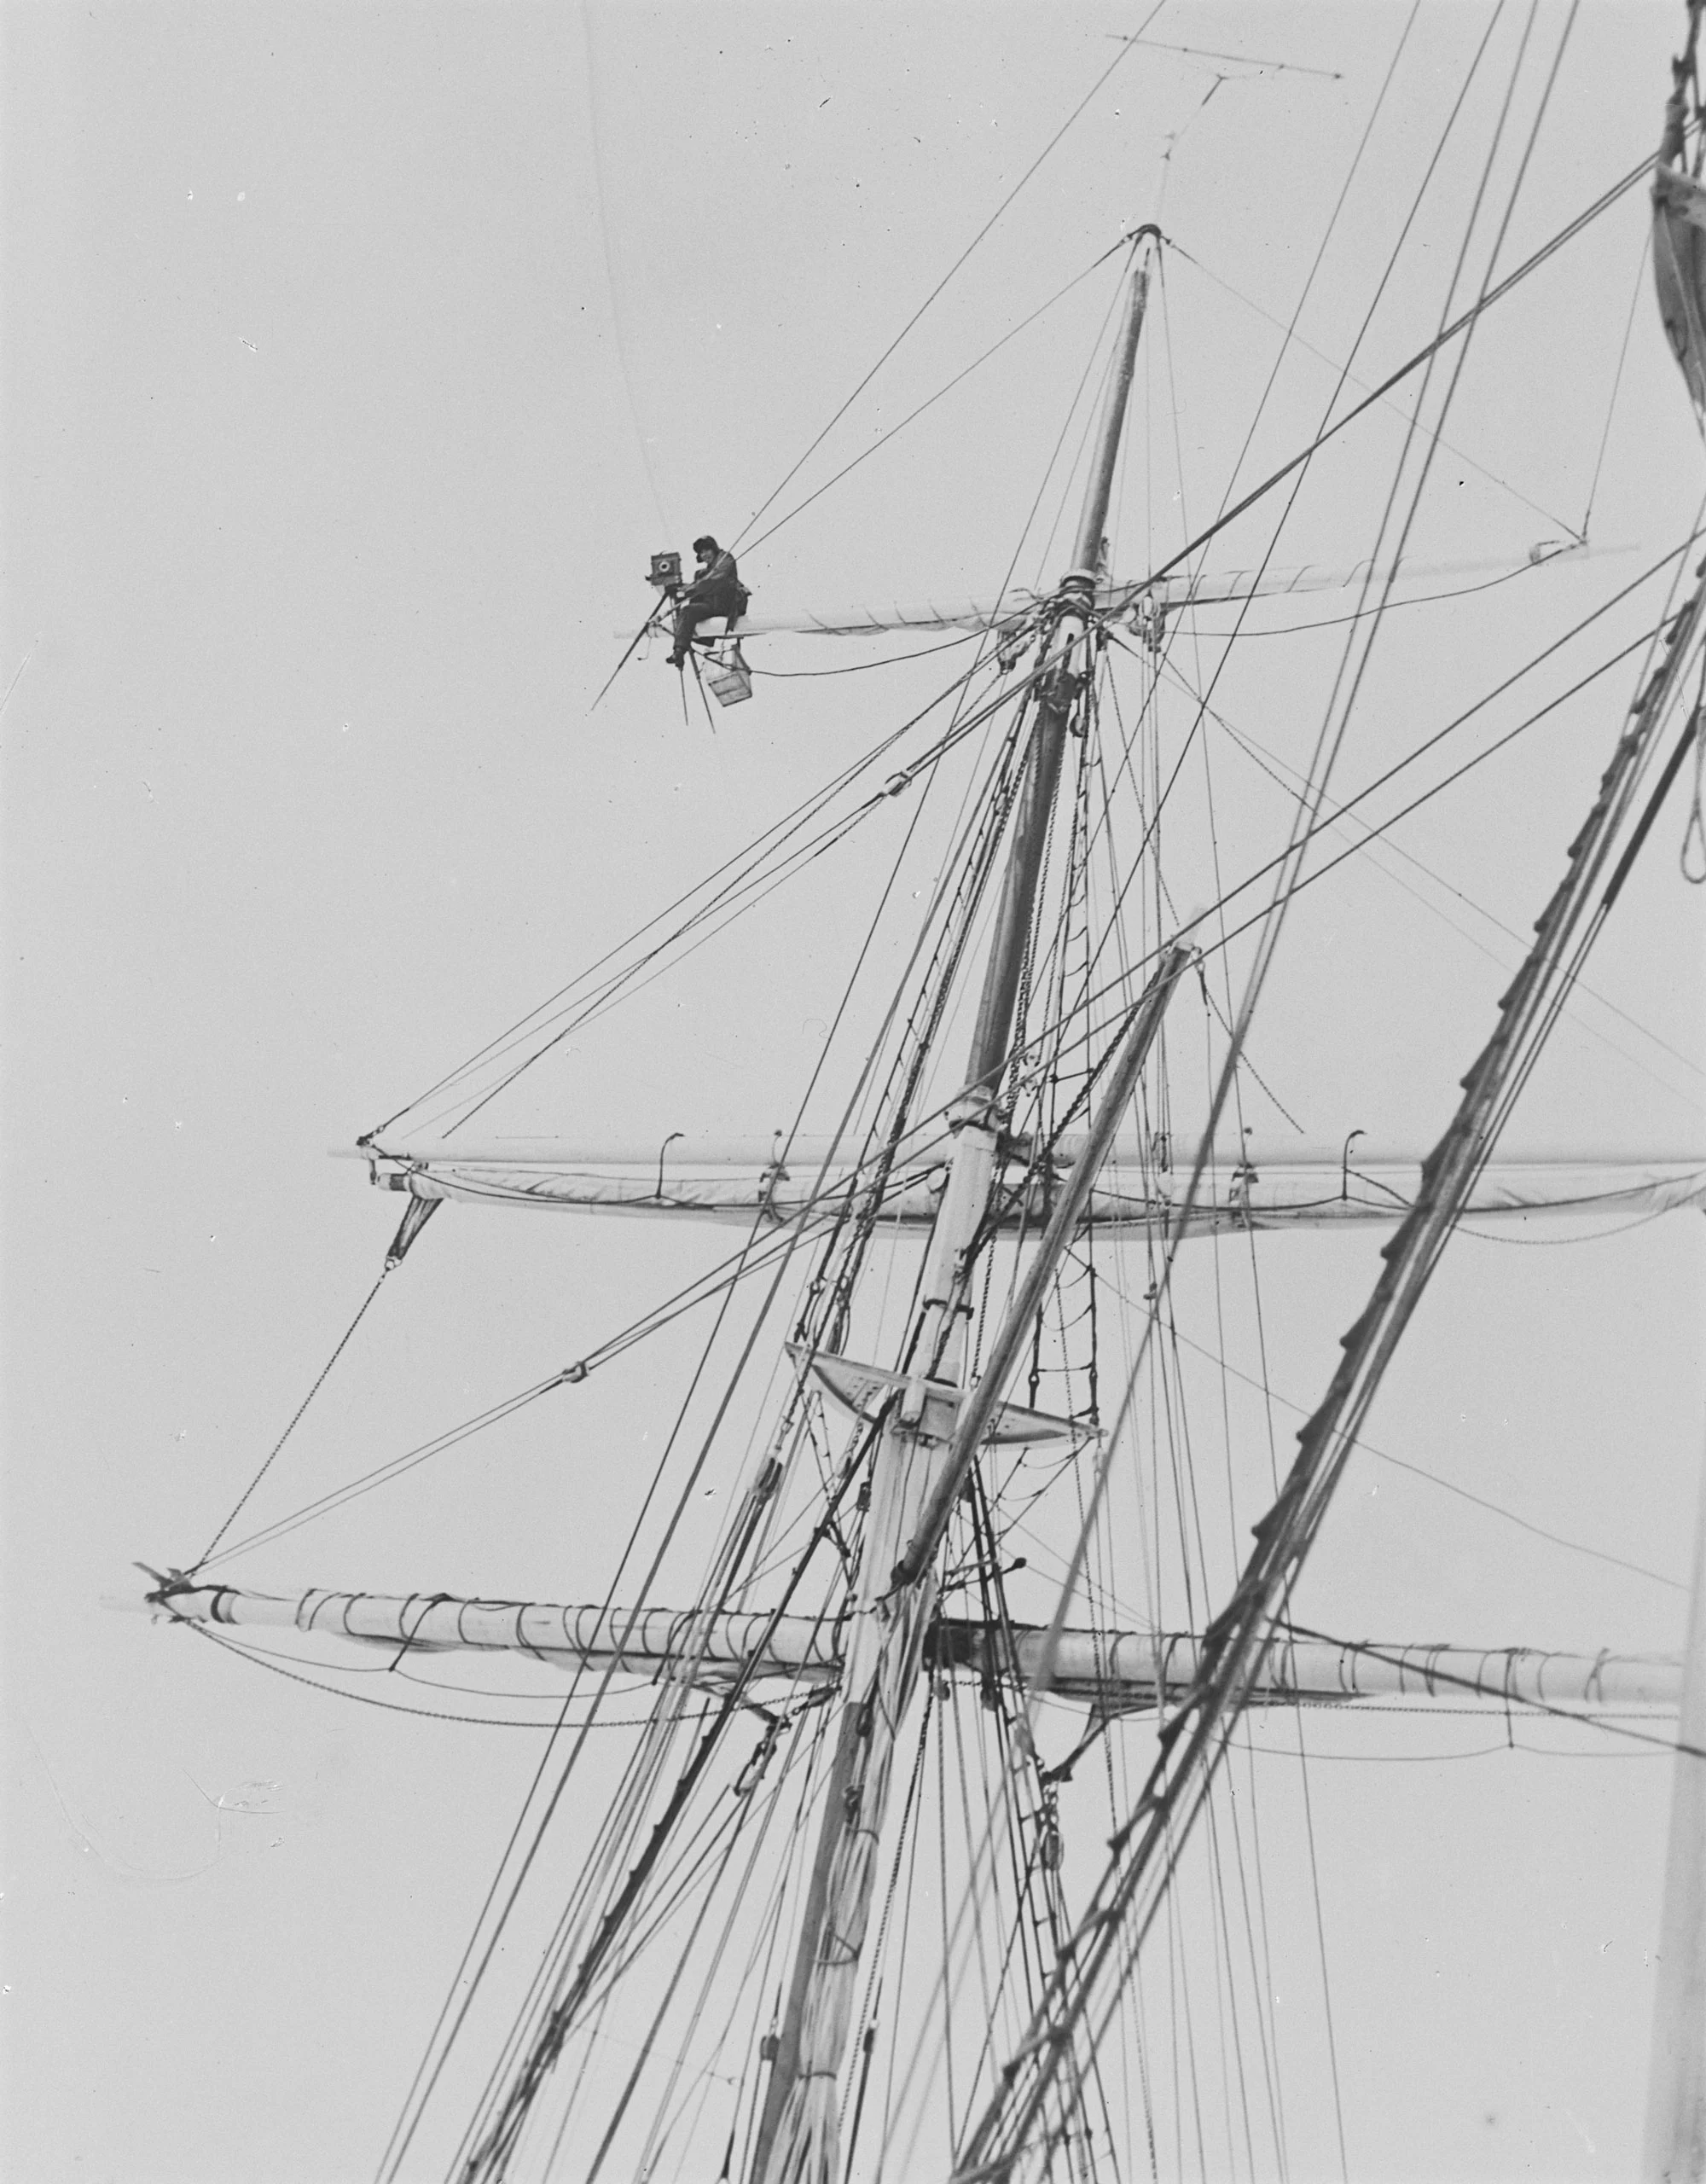 Hurley on Shackleton’s Endurance expedition, filming from the ship’s rigging. © Royal Geographical Society (with IBG)